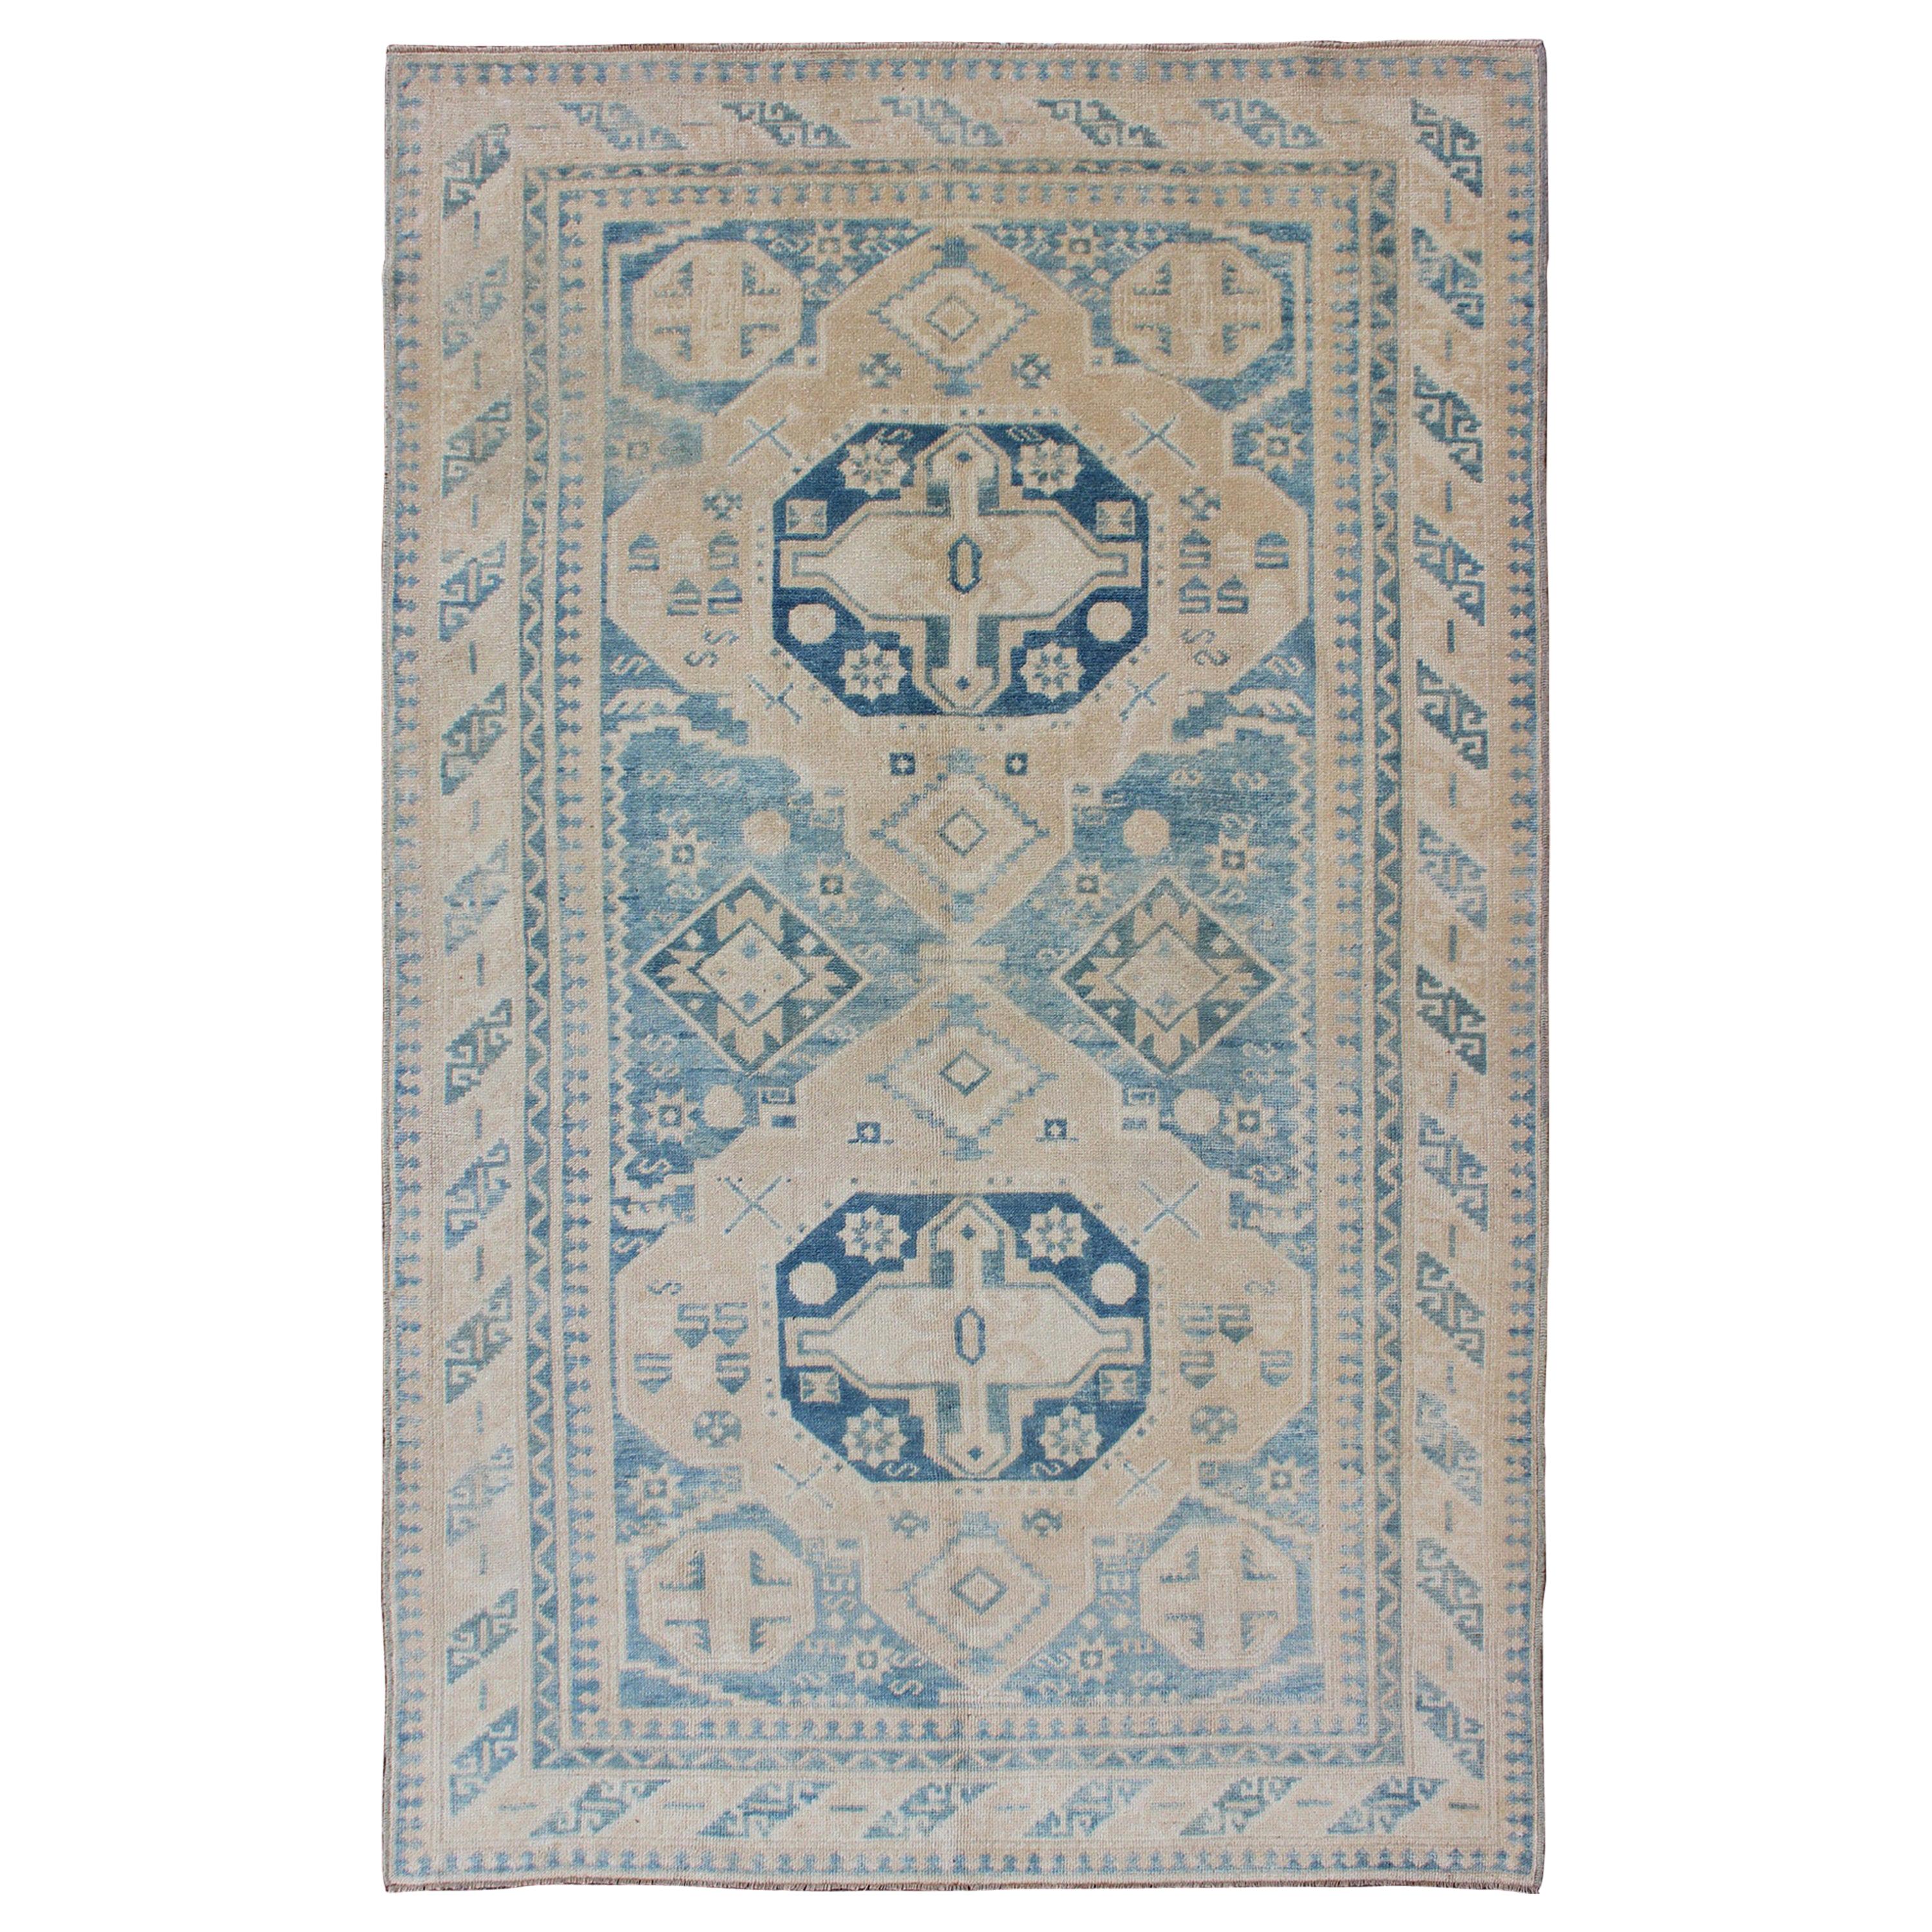 Blue and Tan Vintage Turkish Oushak Rug with Geometric Dual Medallions